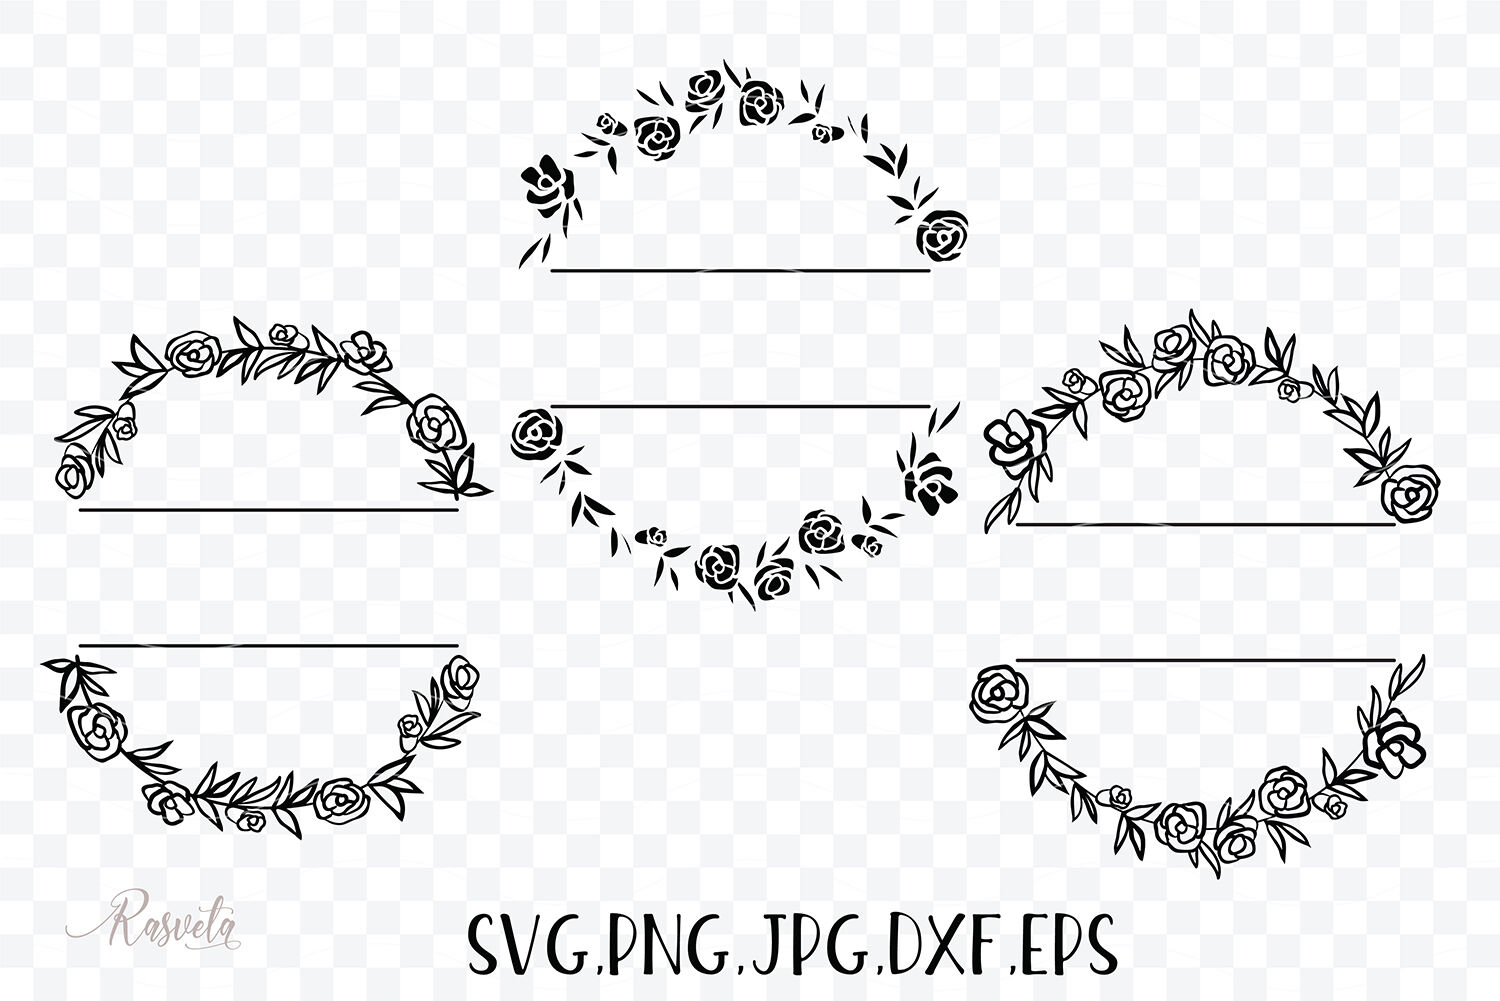 Download Jpg Round Front Door Hanger Sign Svg Png Print File Eps Welcome To Our Home Wreath Sign Dxf Cricut Cut File Digital Download Clip Art Art Collectibles Seasonalliving Com